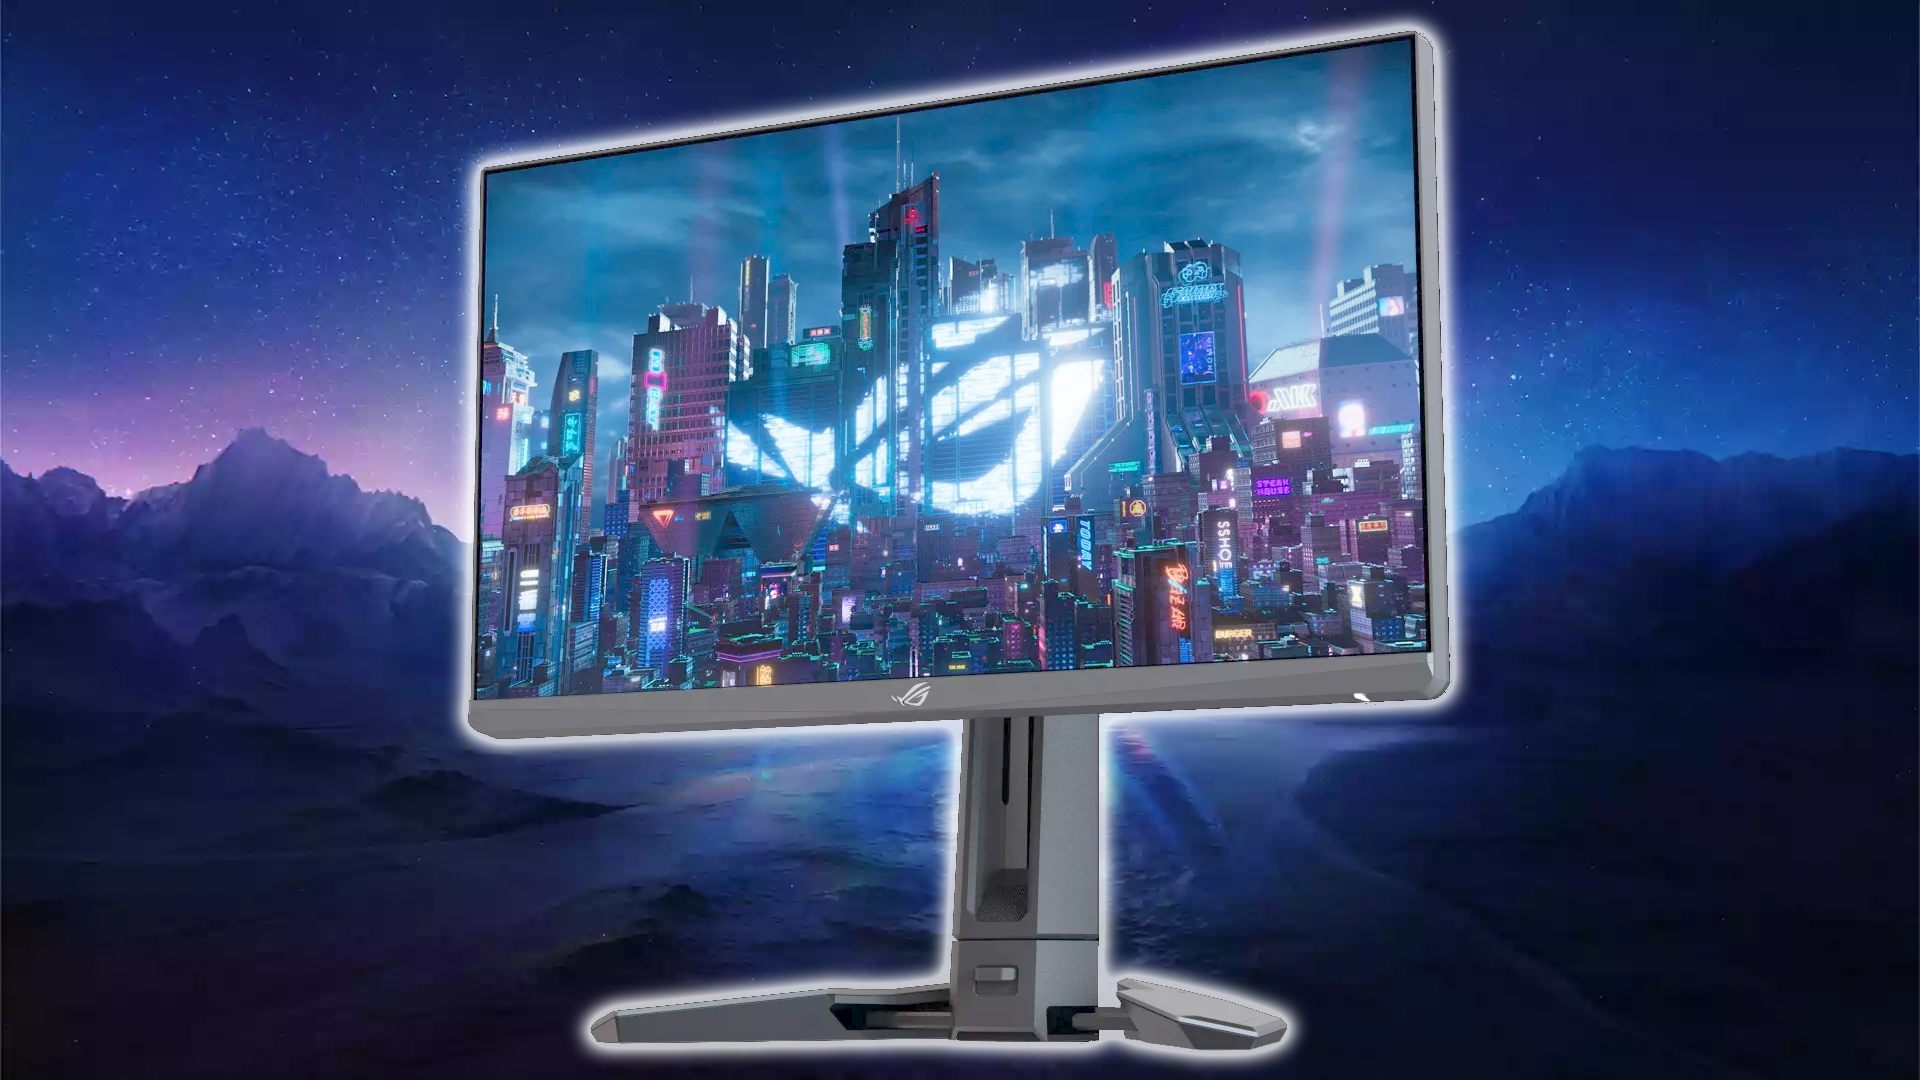 Asus unveils ridiculously fast 540Hz gaming monitor